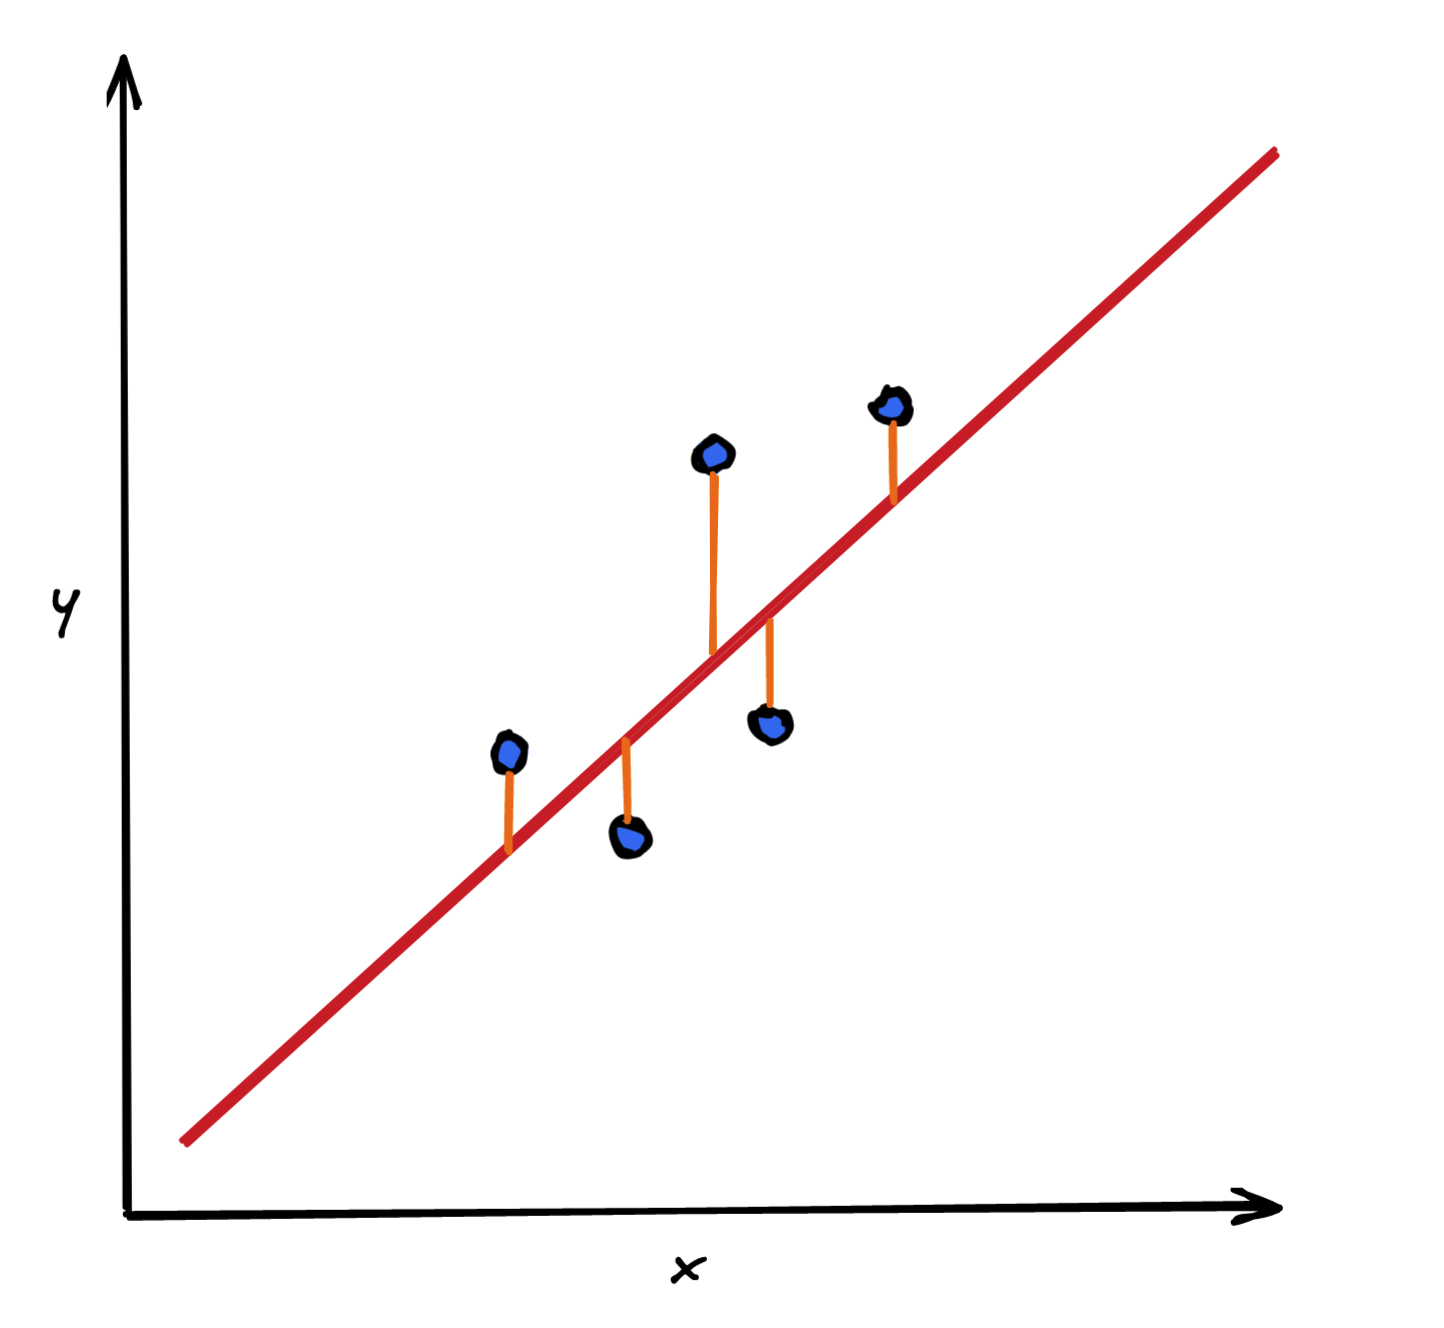 Line graph showing the residuals of a linear model